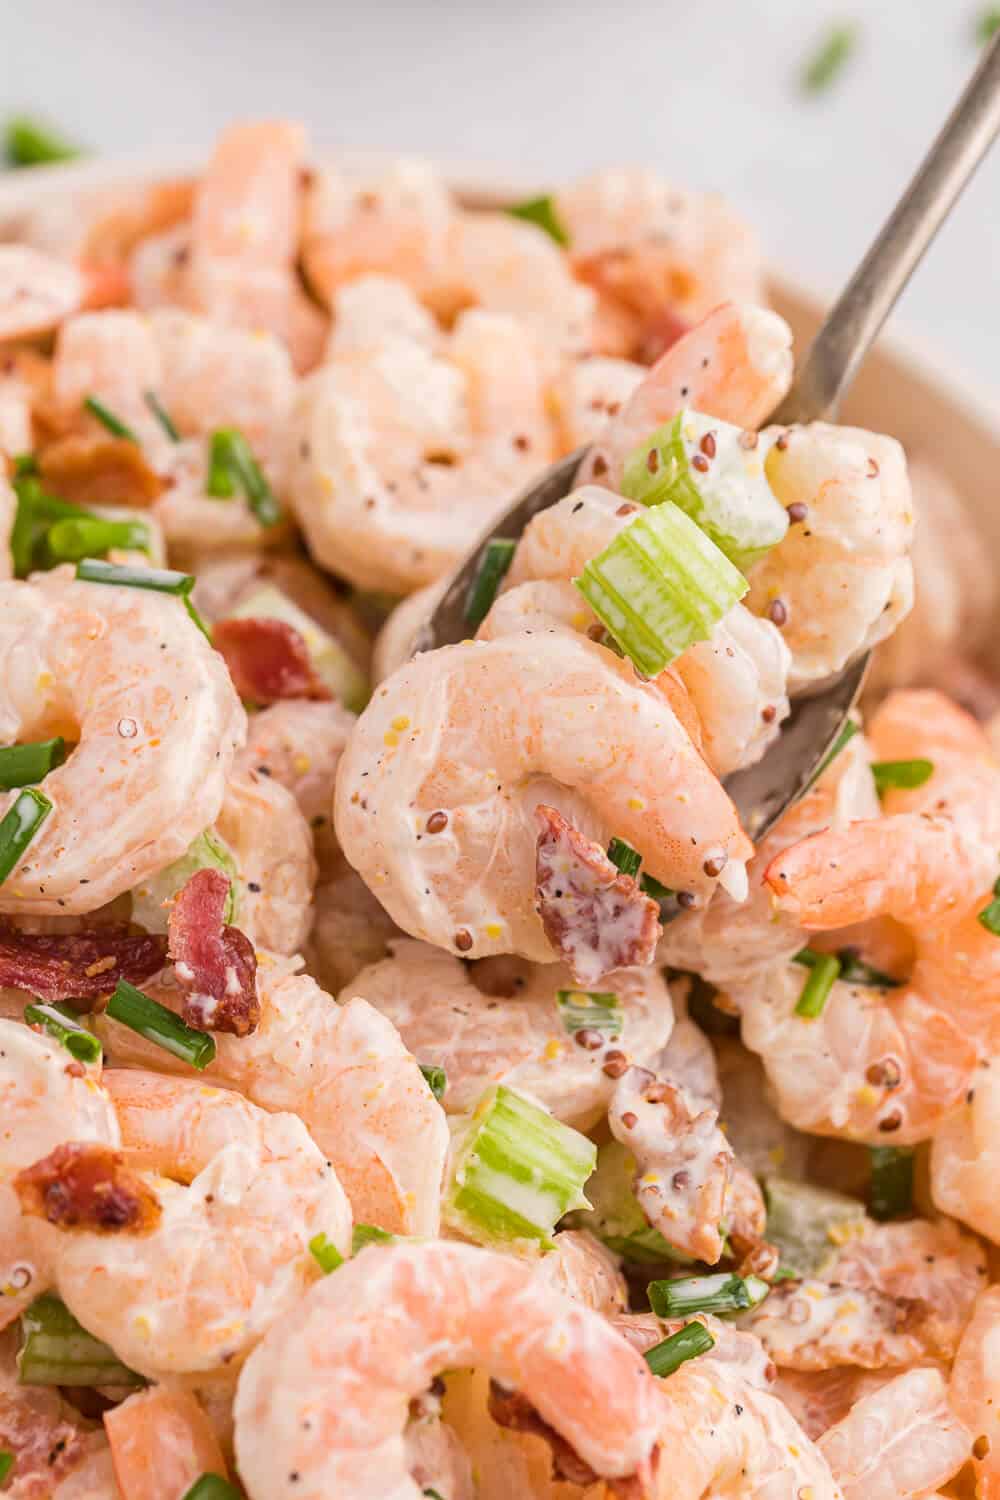 A bowl of shrimp salad with a spoon.